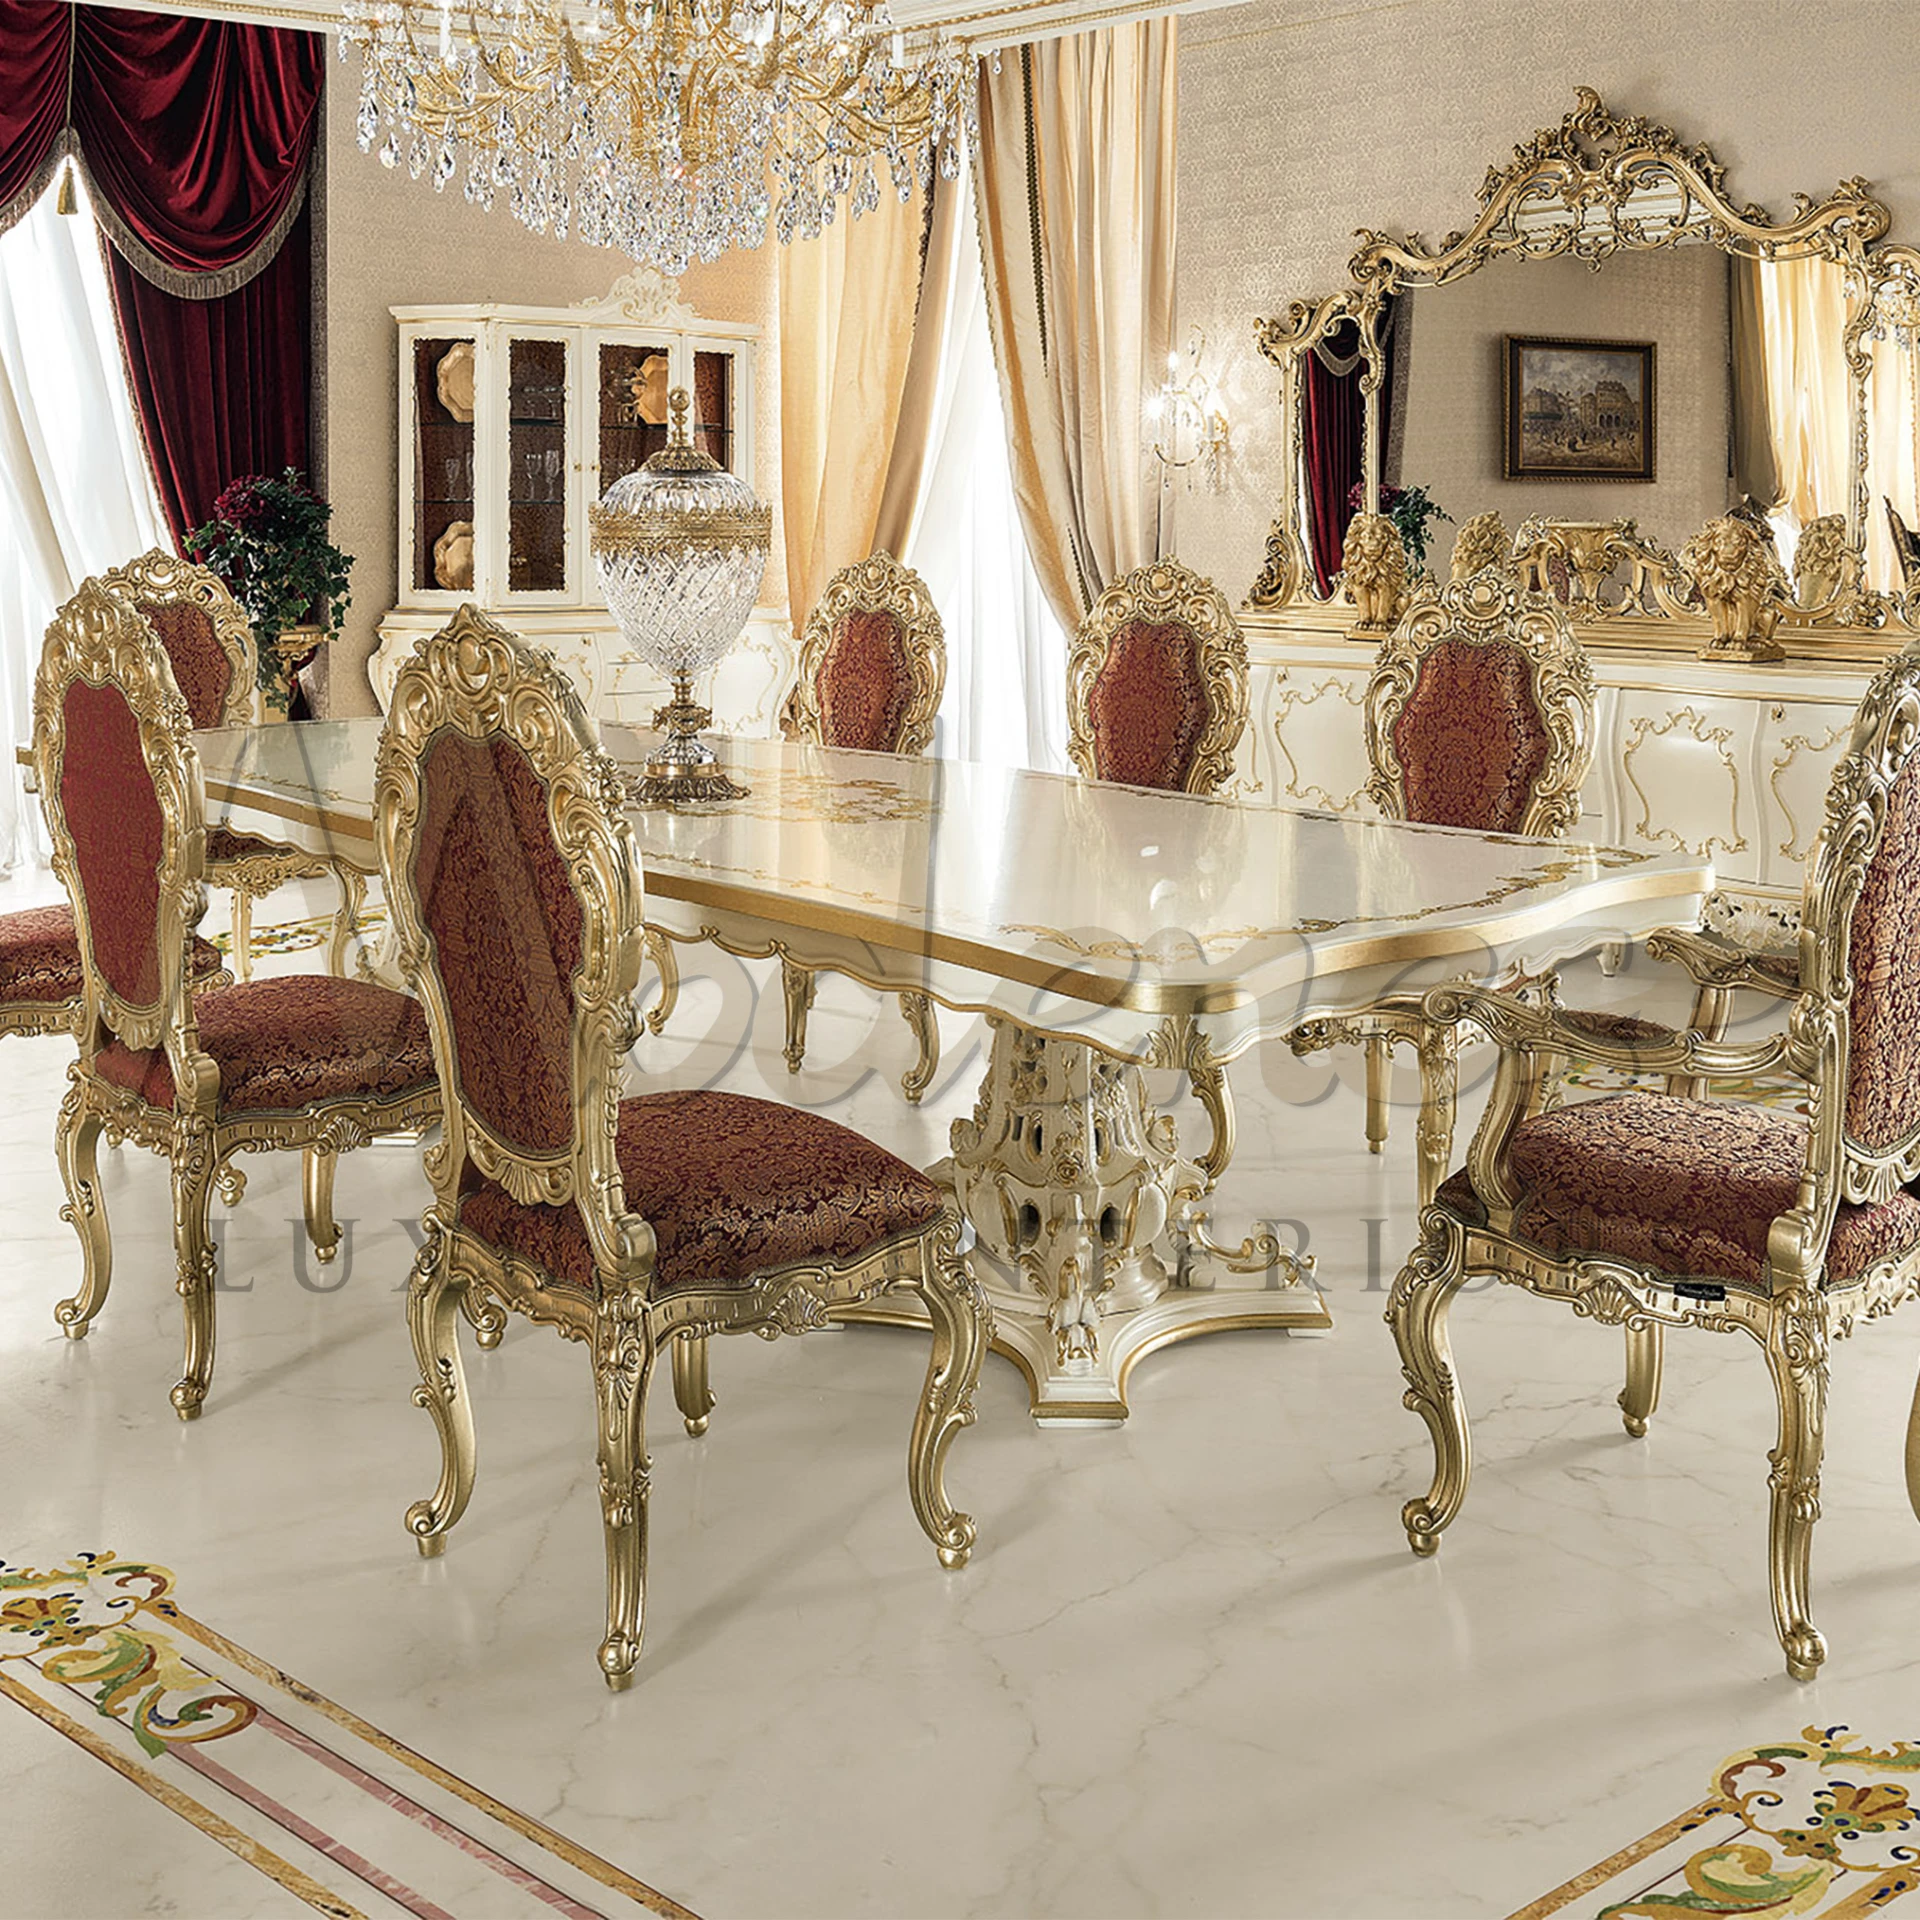 Discover your new mansion with Modenese Furniture's baroque dining table. Hand-carved squiggle details, gold leaves, and patterned fabric bring regal sophistication.